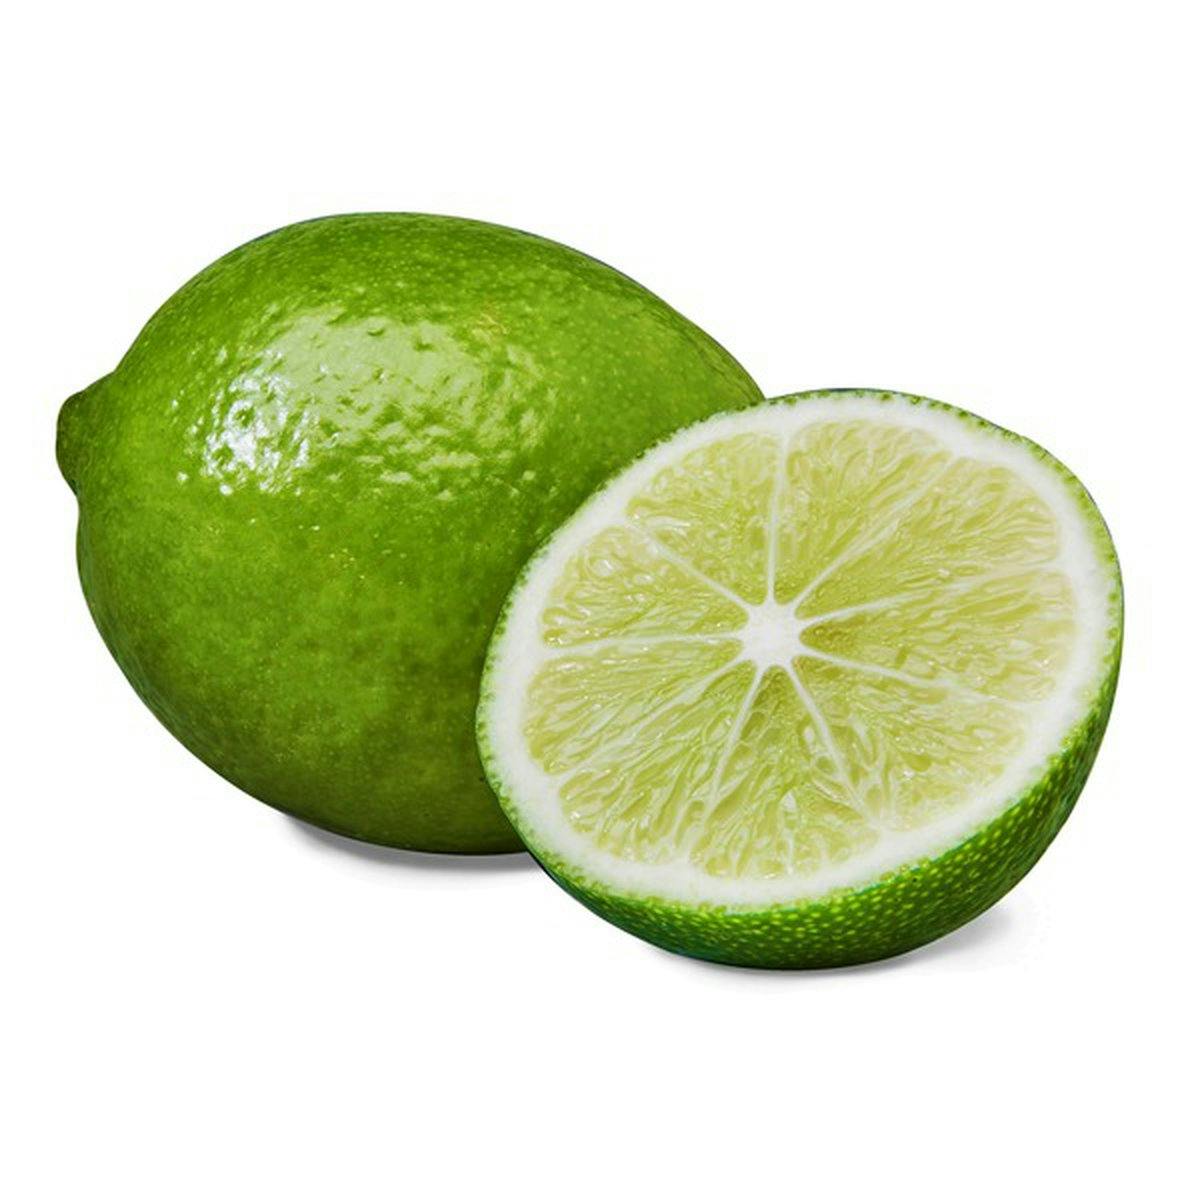 lime juice to finish when served